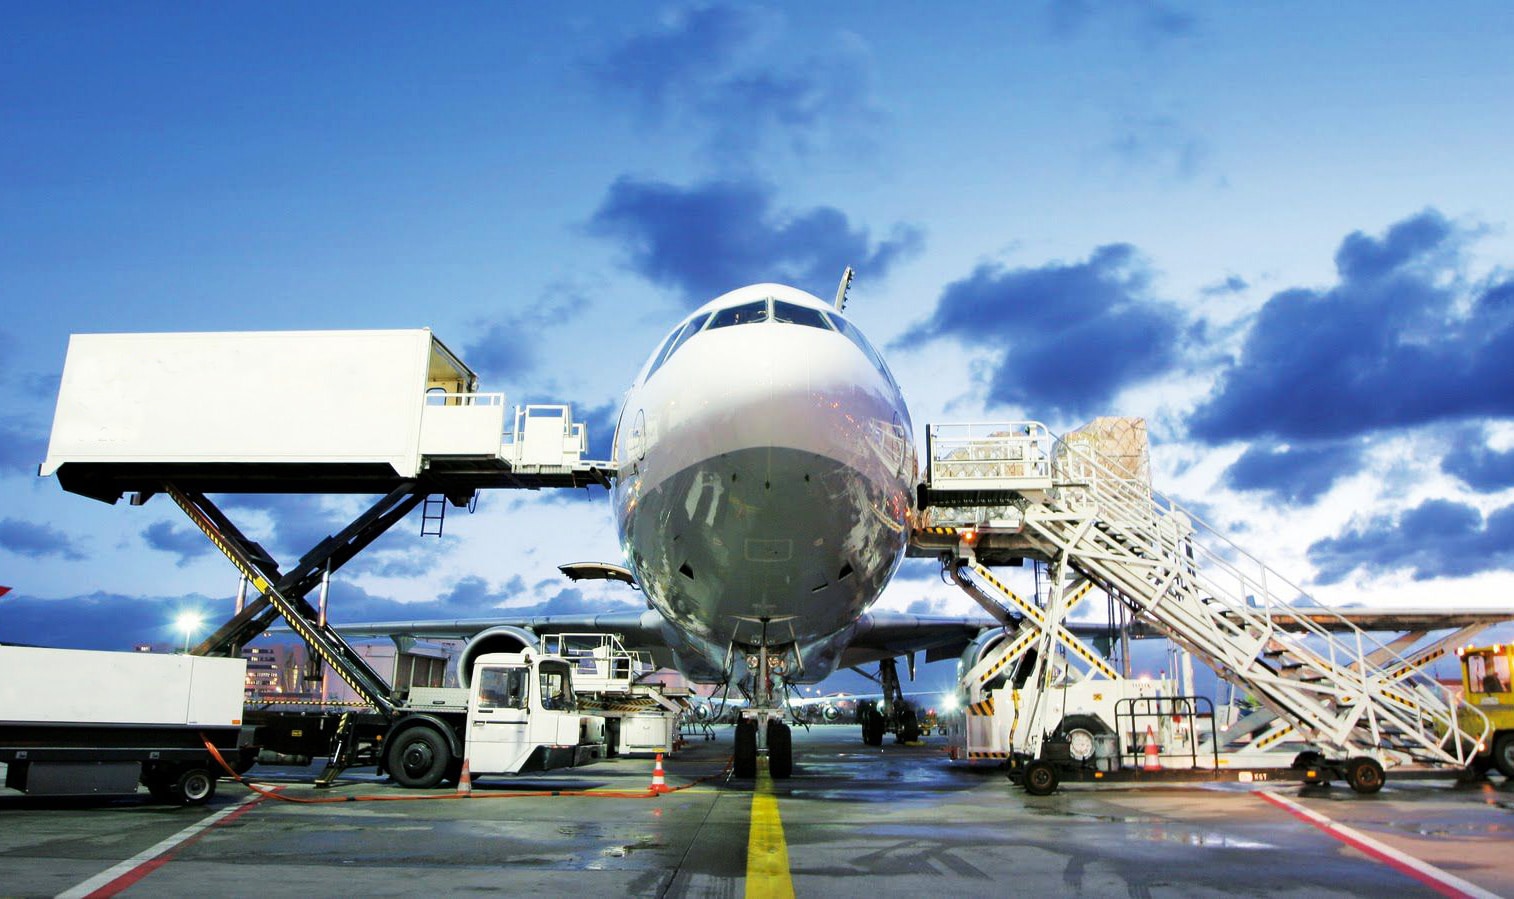 airplane on the airport, loading cargo to the airplane, trucks standby, providing door-to-door service to ship cargo with shorter transit time, better experience